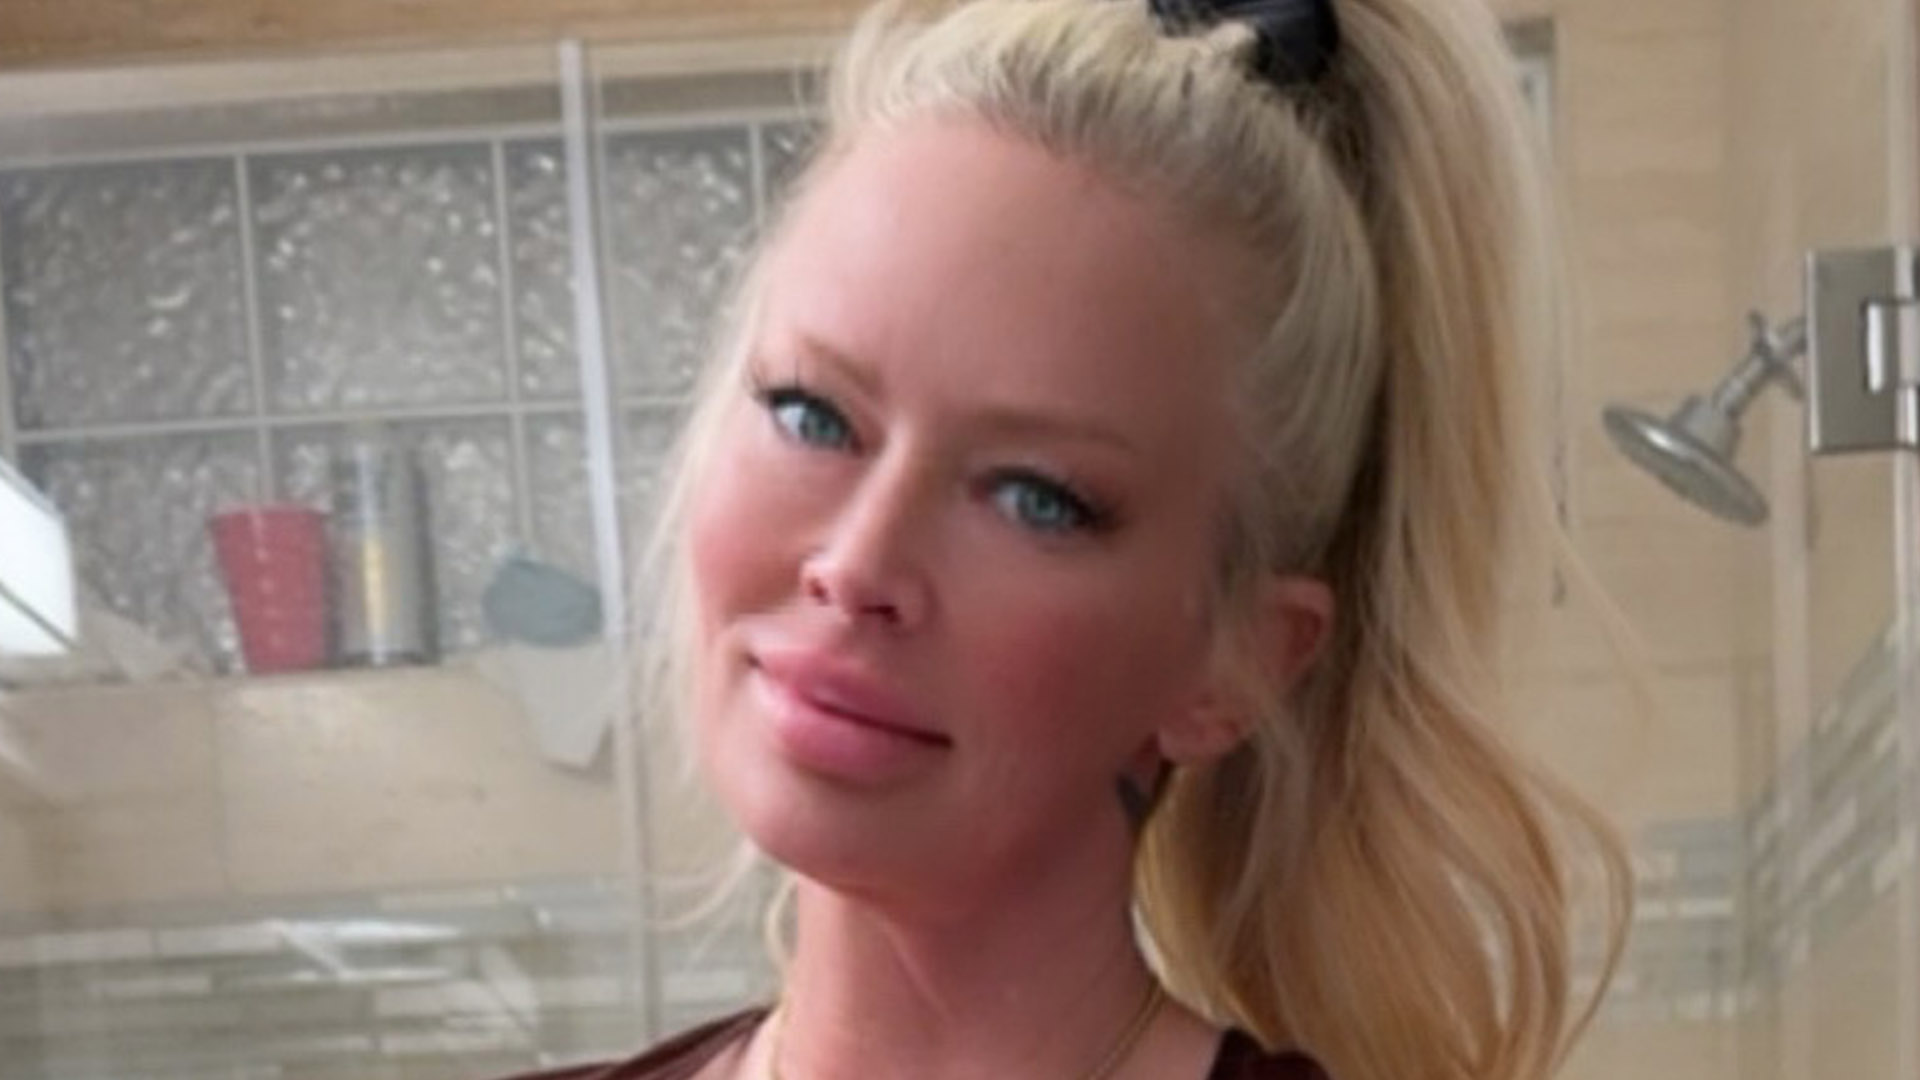 Jenna Jameson displays 100-lb weight loss in yellow crop top and leggings as she says ‘thick is cute’ [Video]